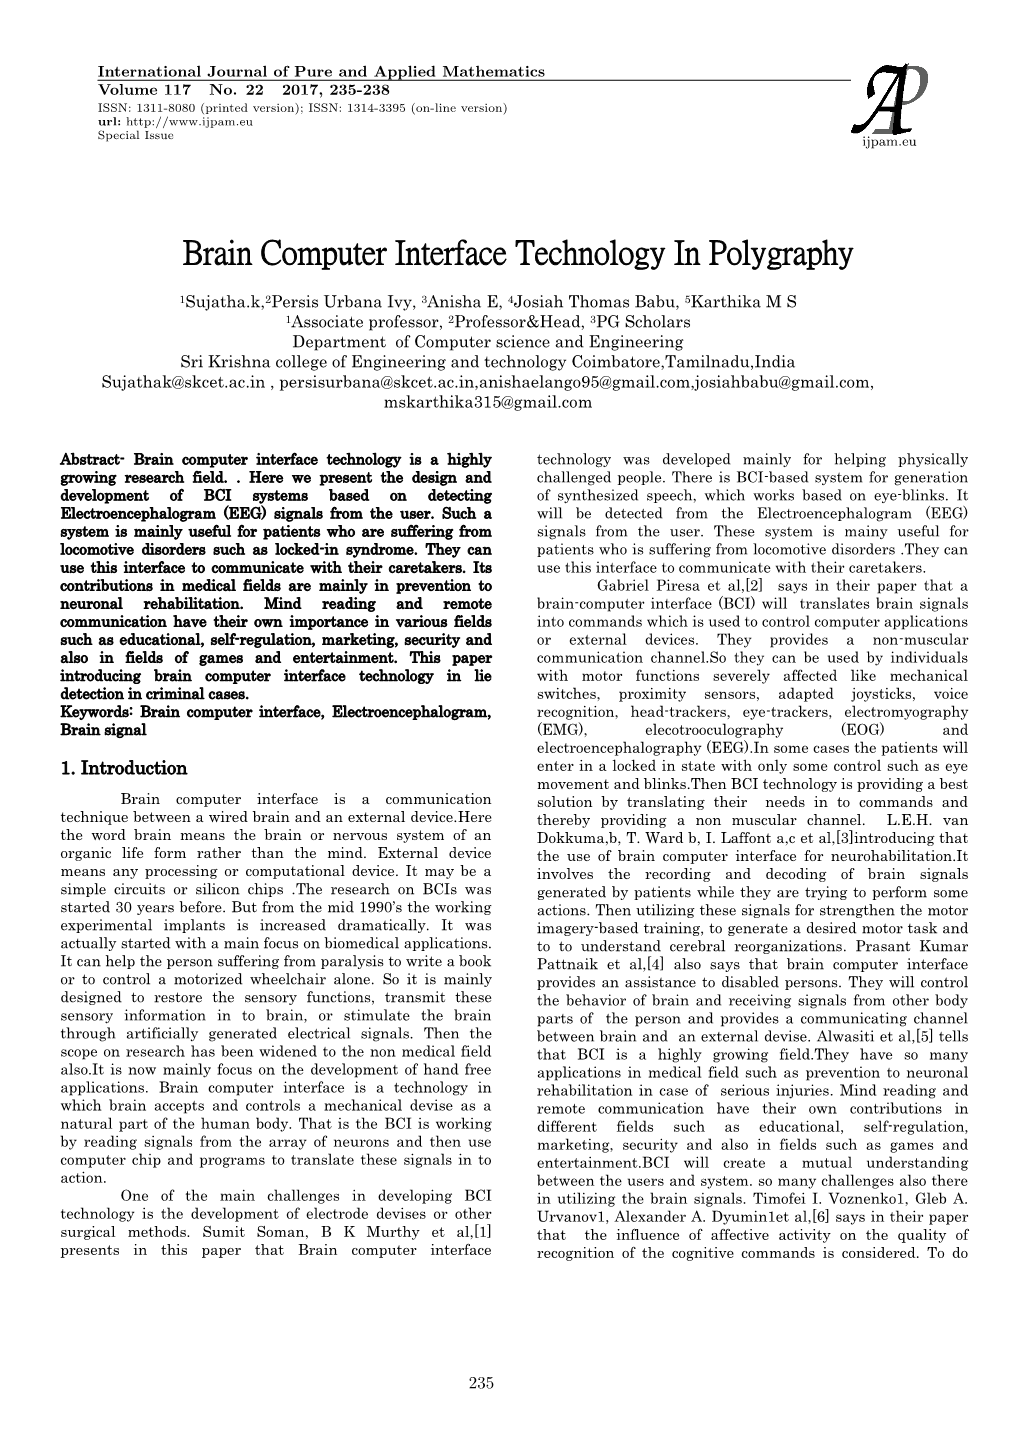 Brain Computer Interface Technology in Polygraphy